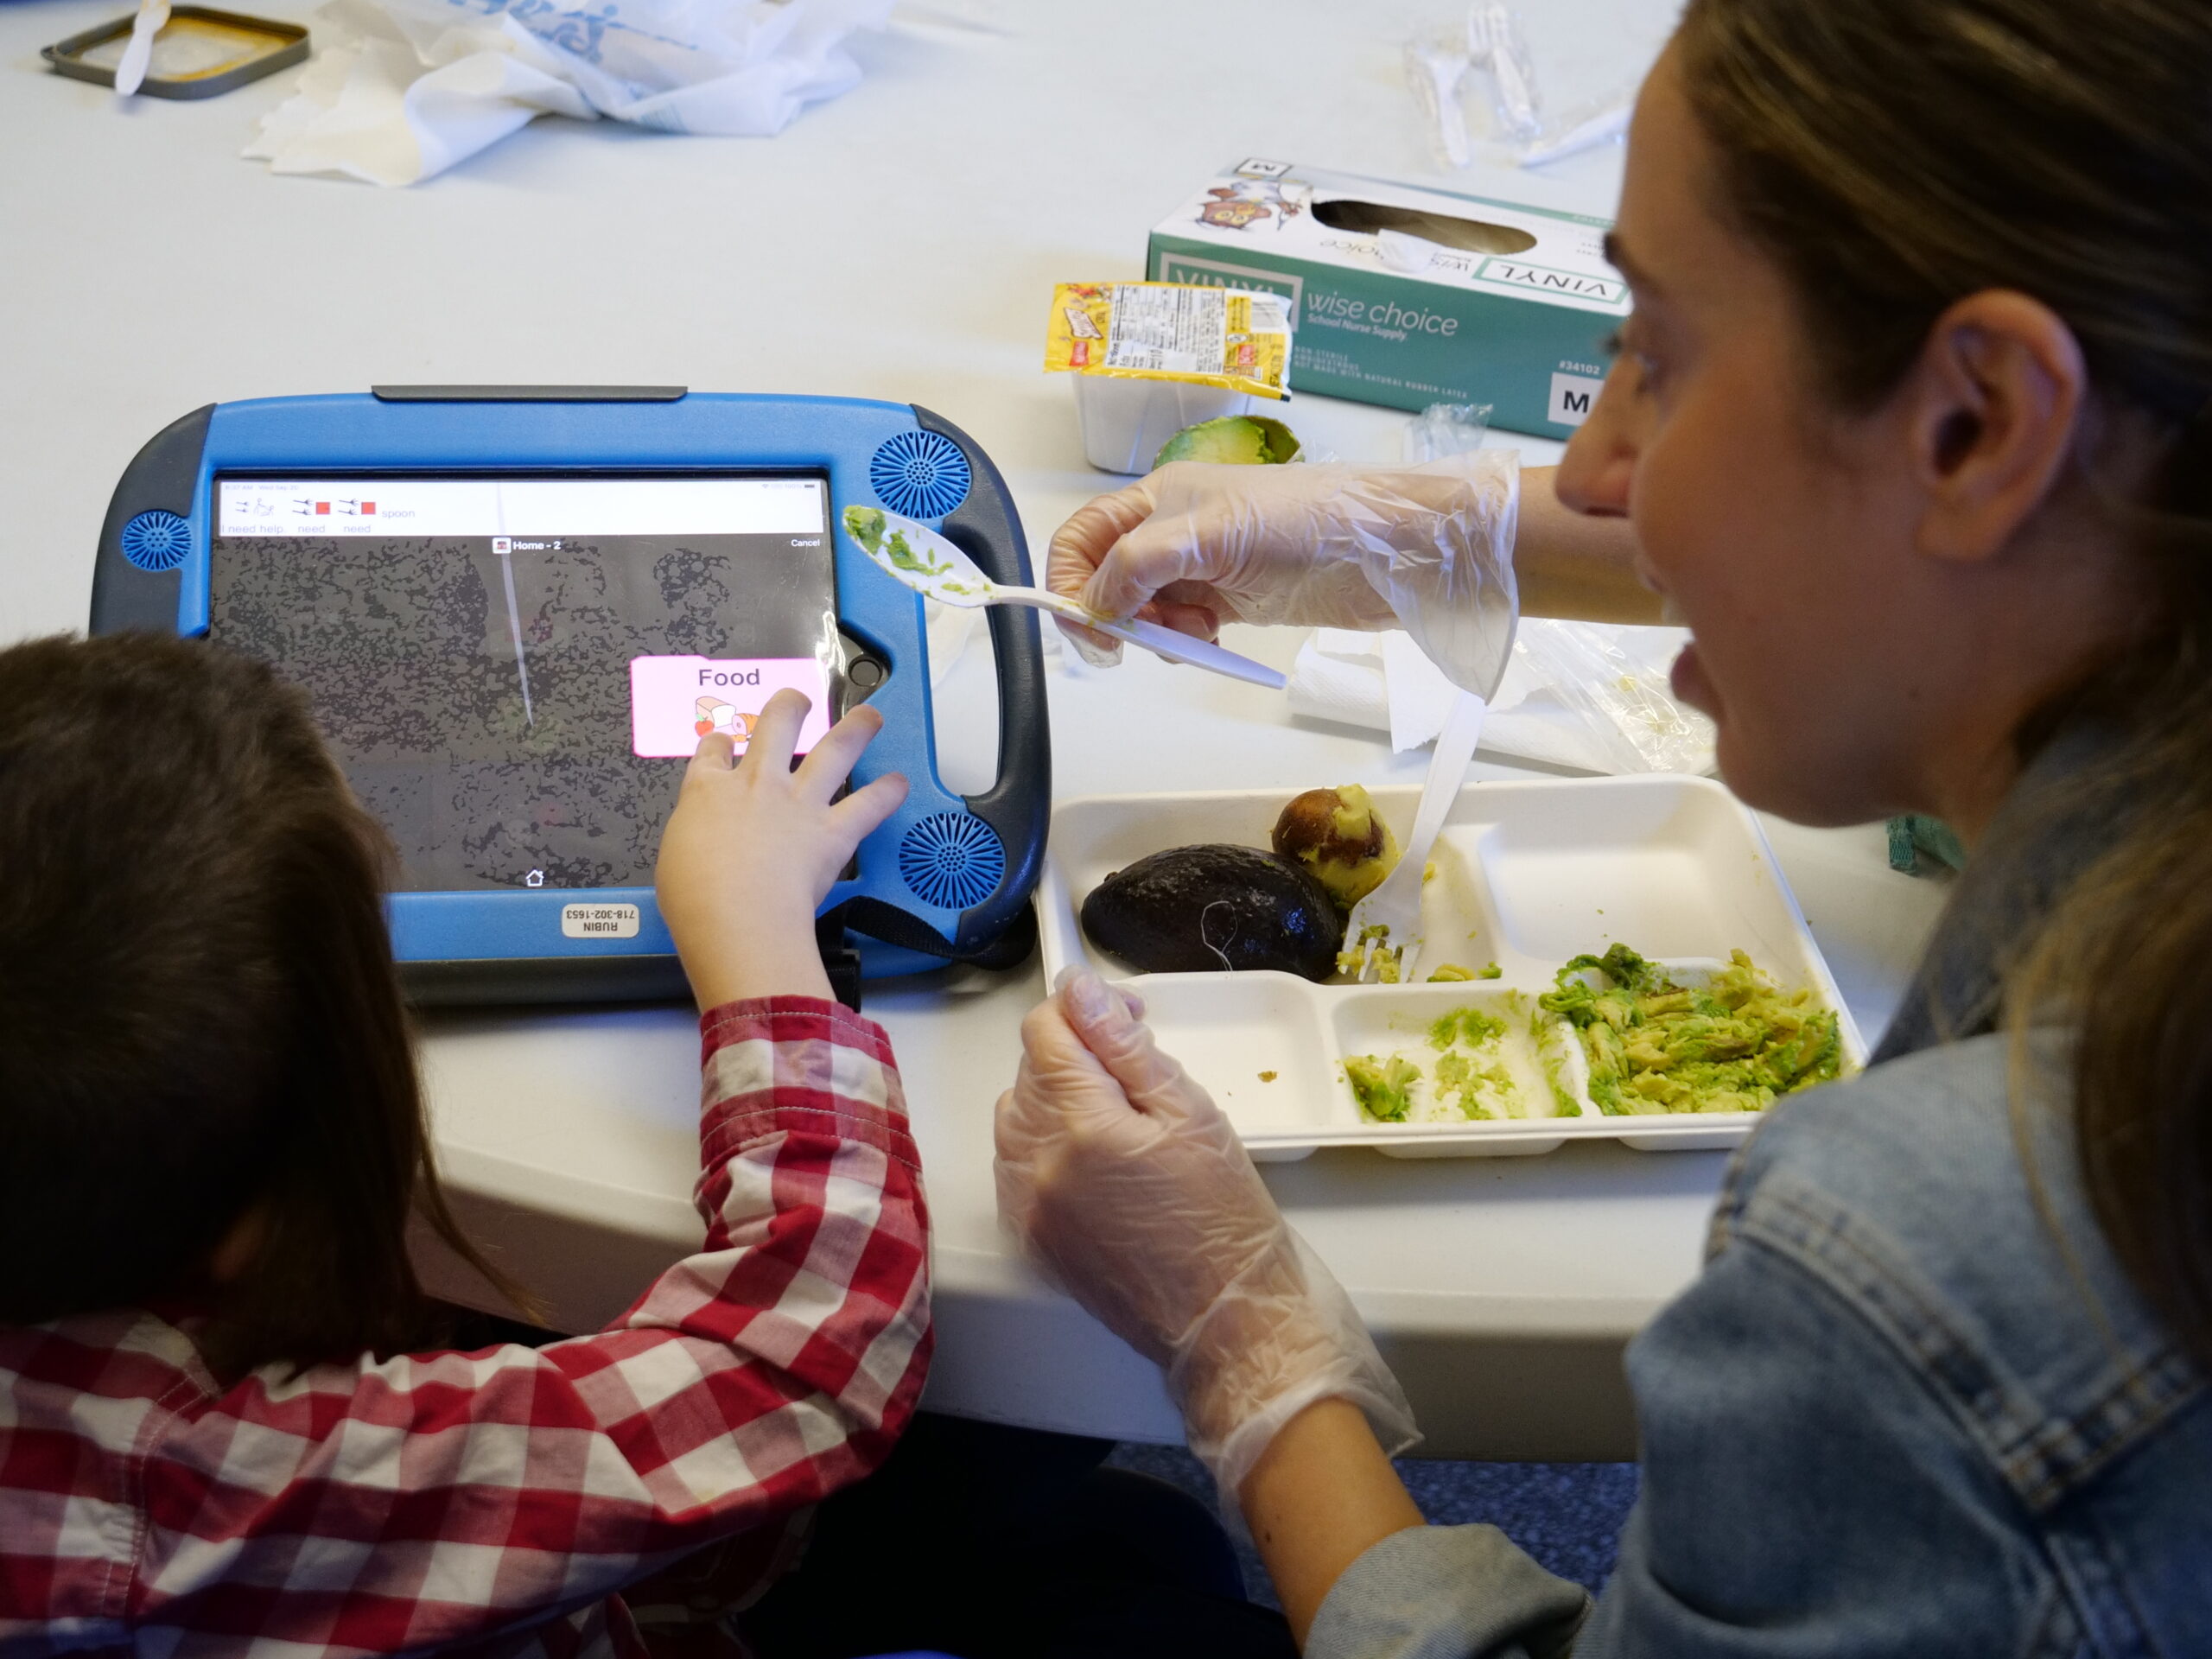 ID: A student points to the word and image of "food" on his AAC device. His feeding therapist sits next to him with a tray of mashed avocado while holding a spoon.